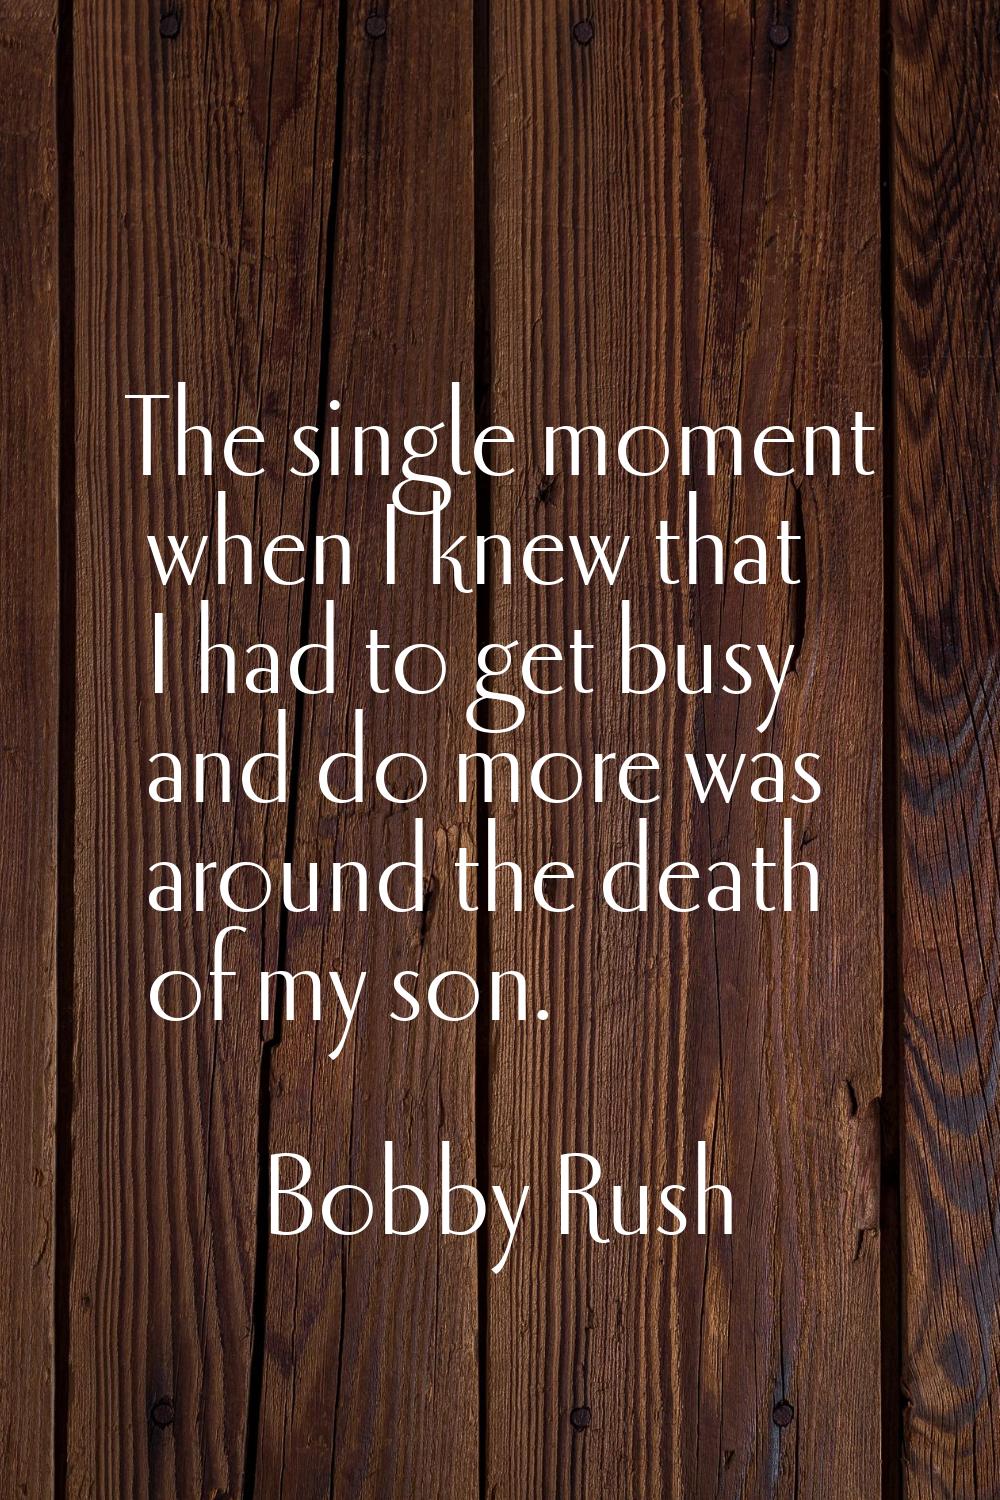 The single moment when I knew that I had to get busy and do more was around the death of my son.